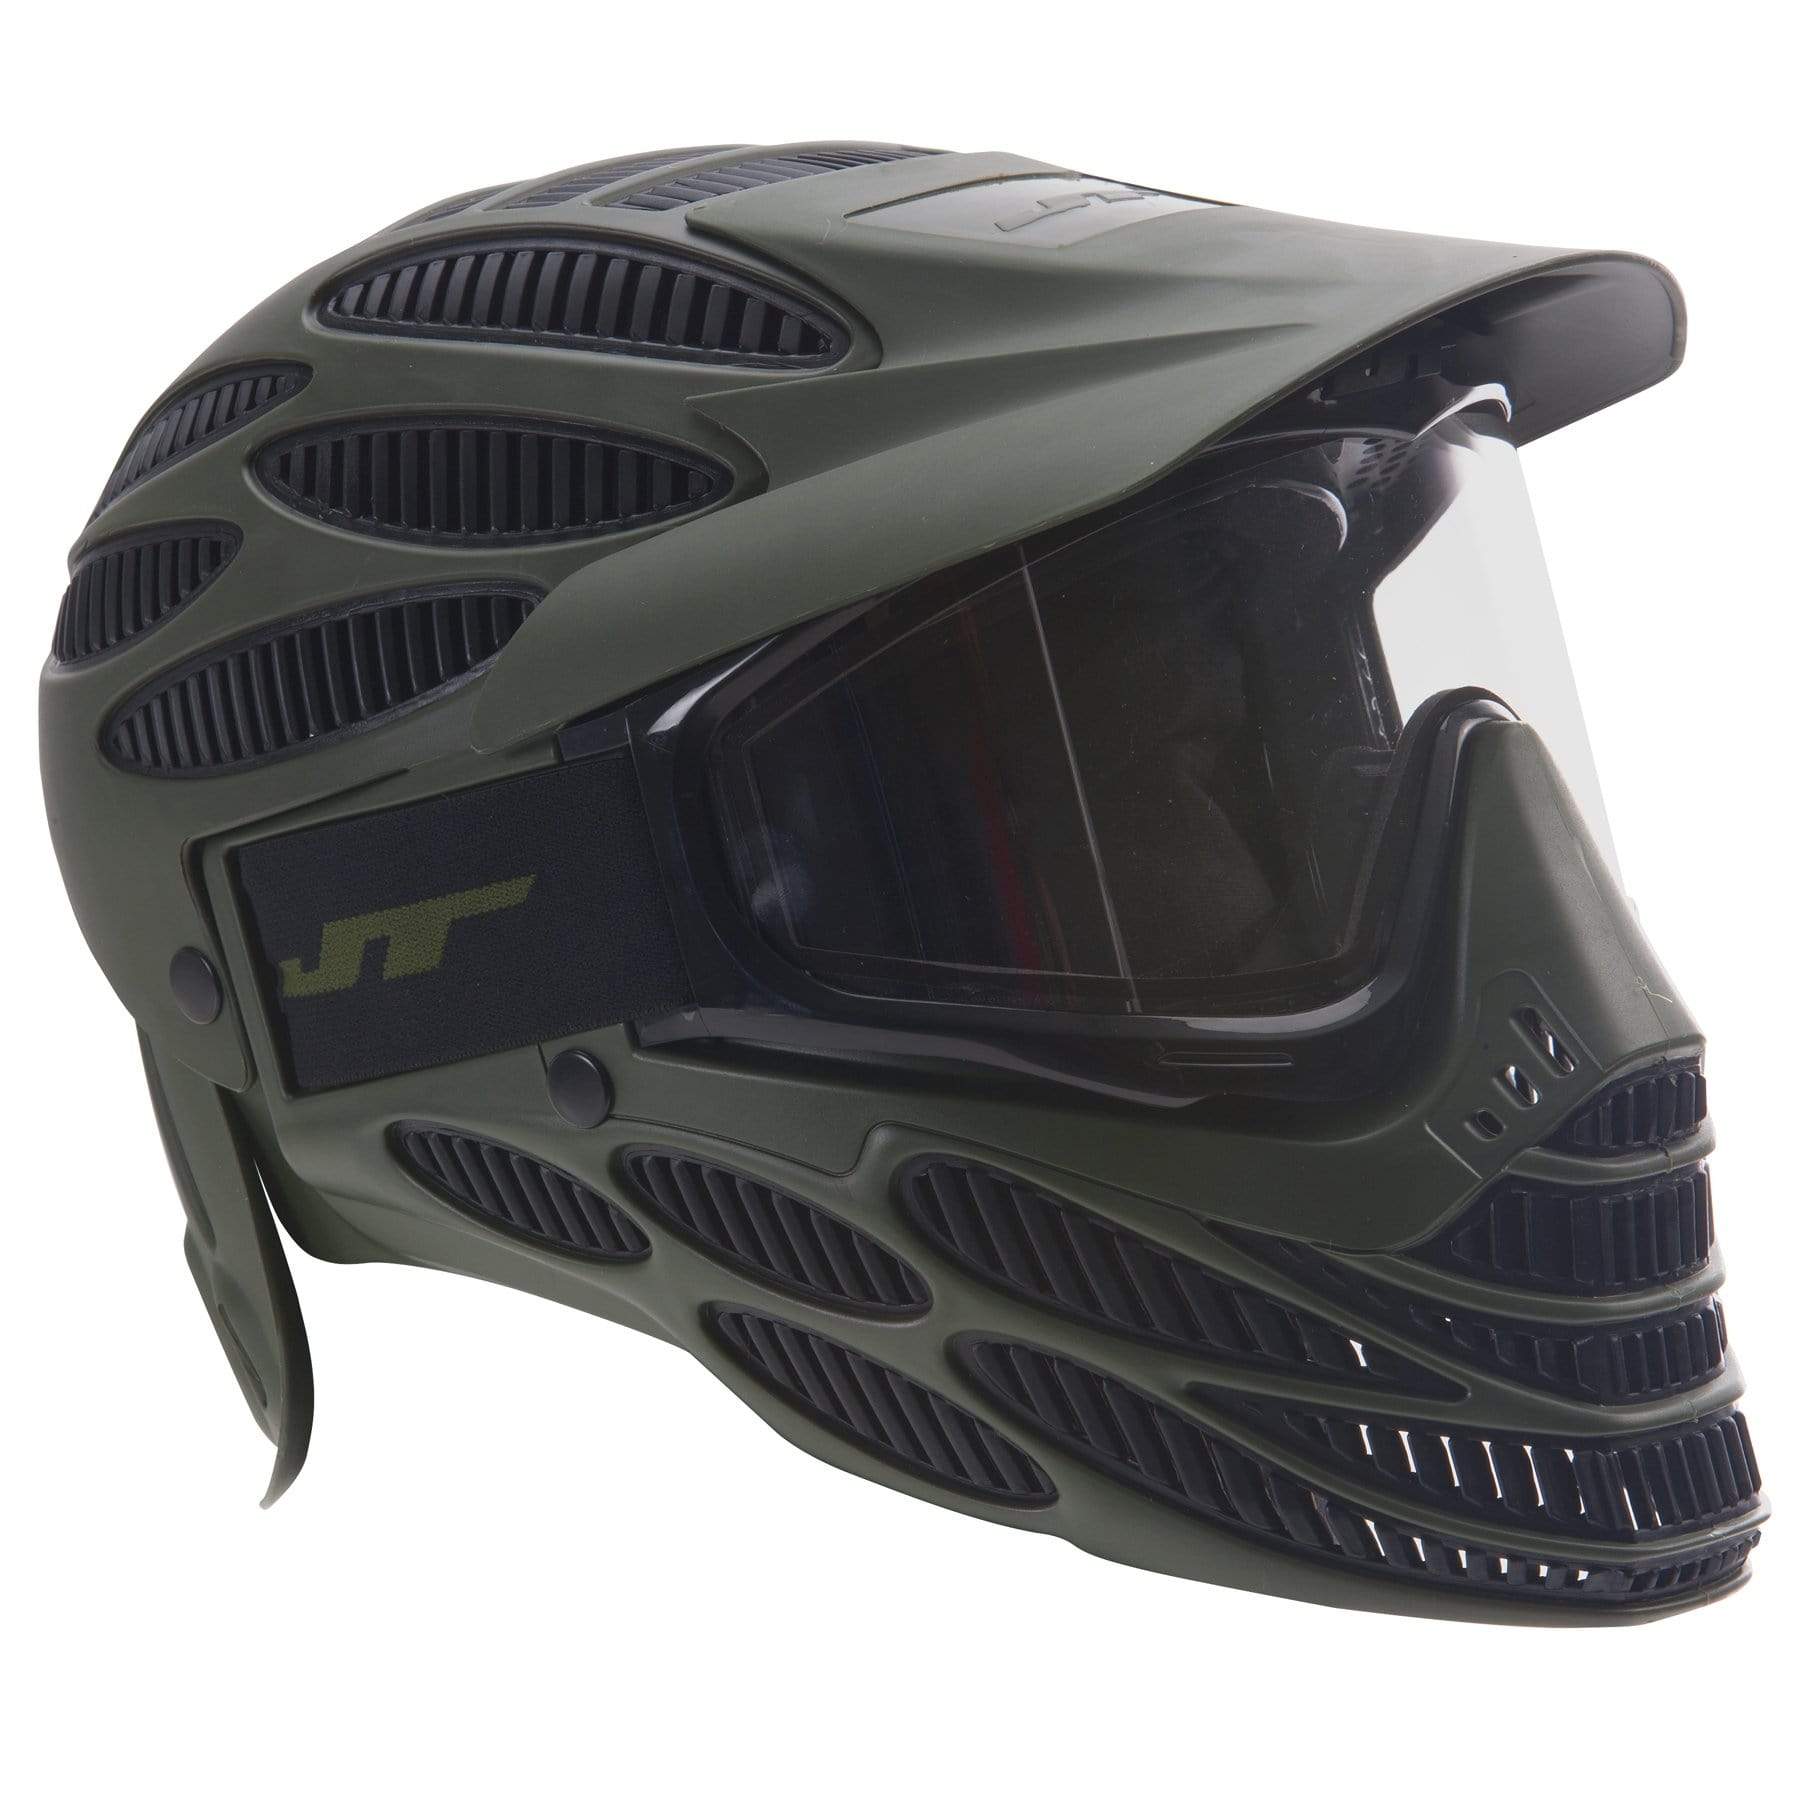 JT SPECTRA FLEX 8 THERMAL FULL COVERAGE GOGGLE - Olive - Eminent Paintball And Airsoft